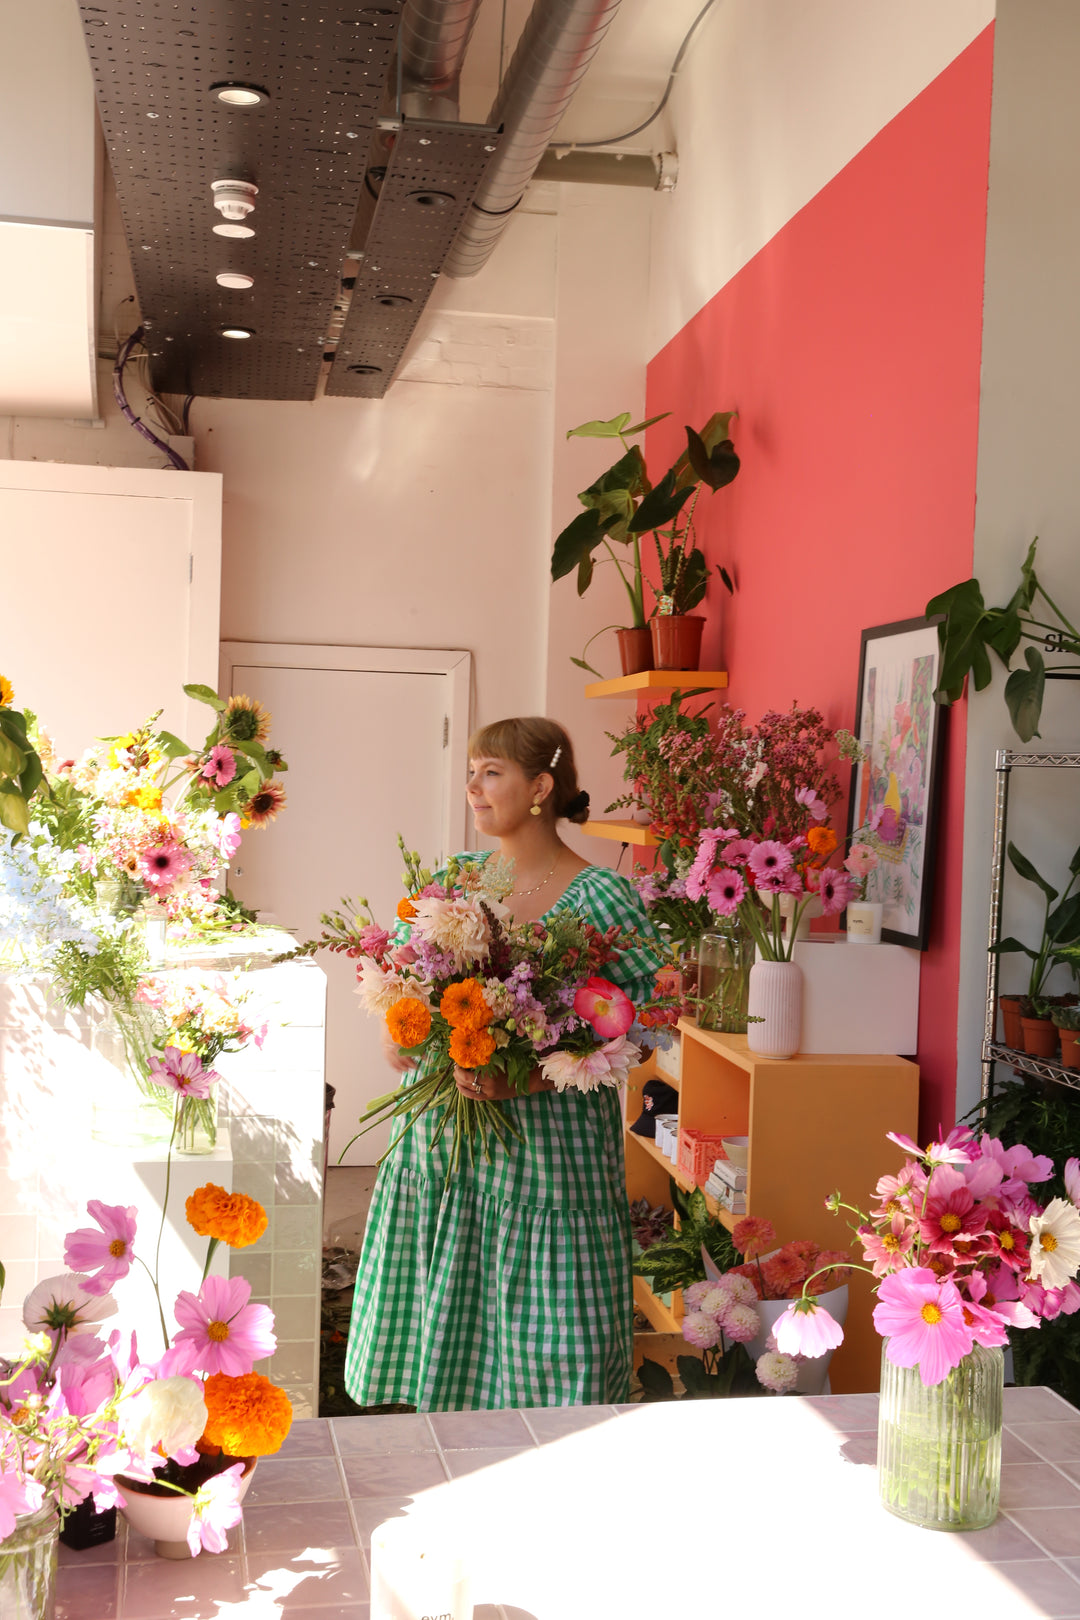 In Conversation with … My Lady Garden / Florist